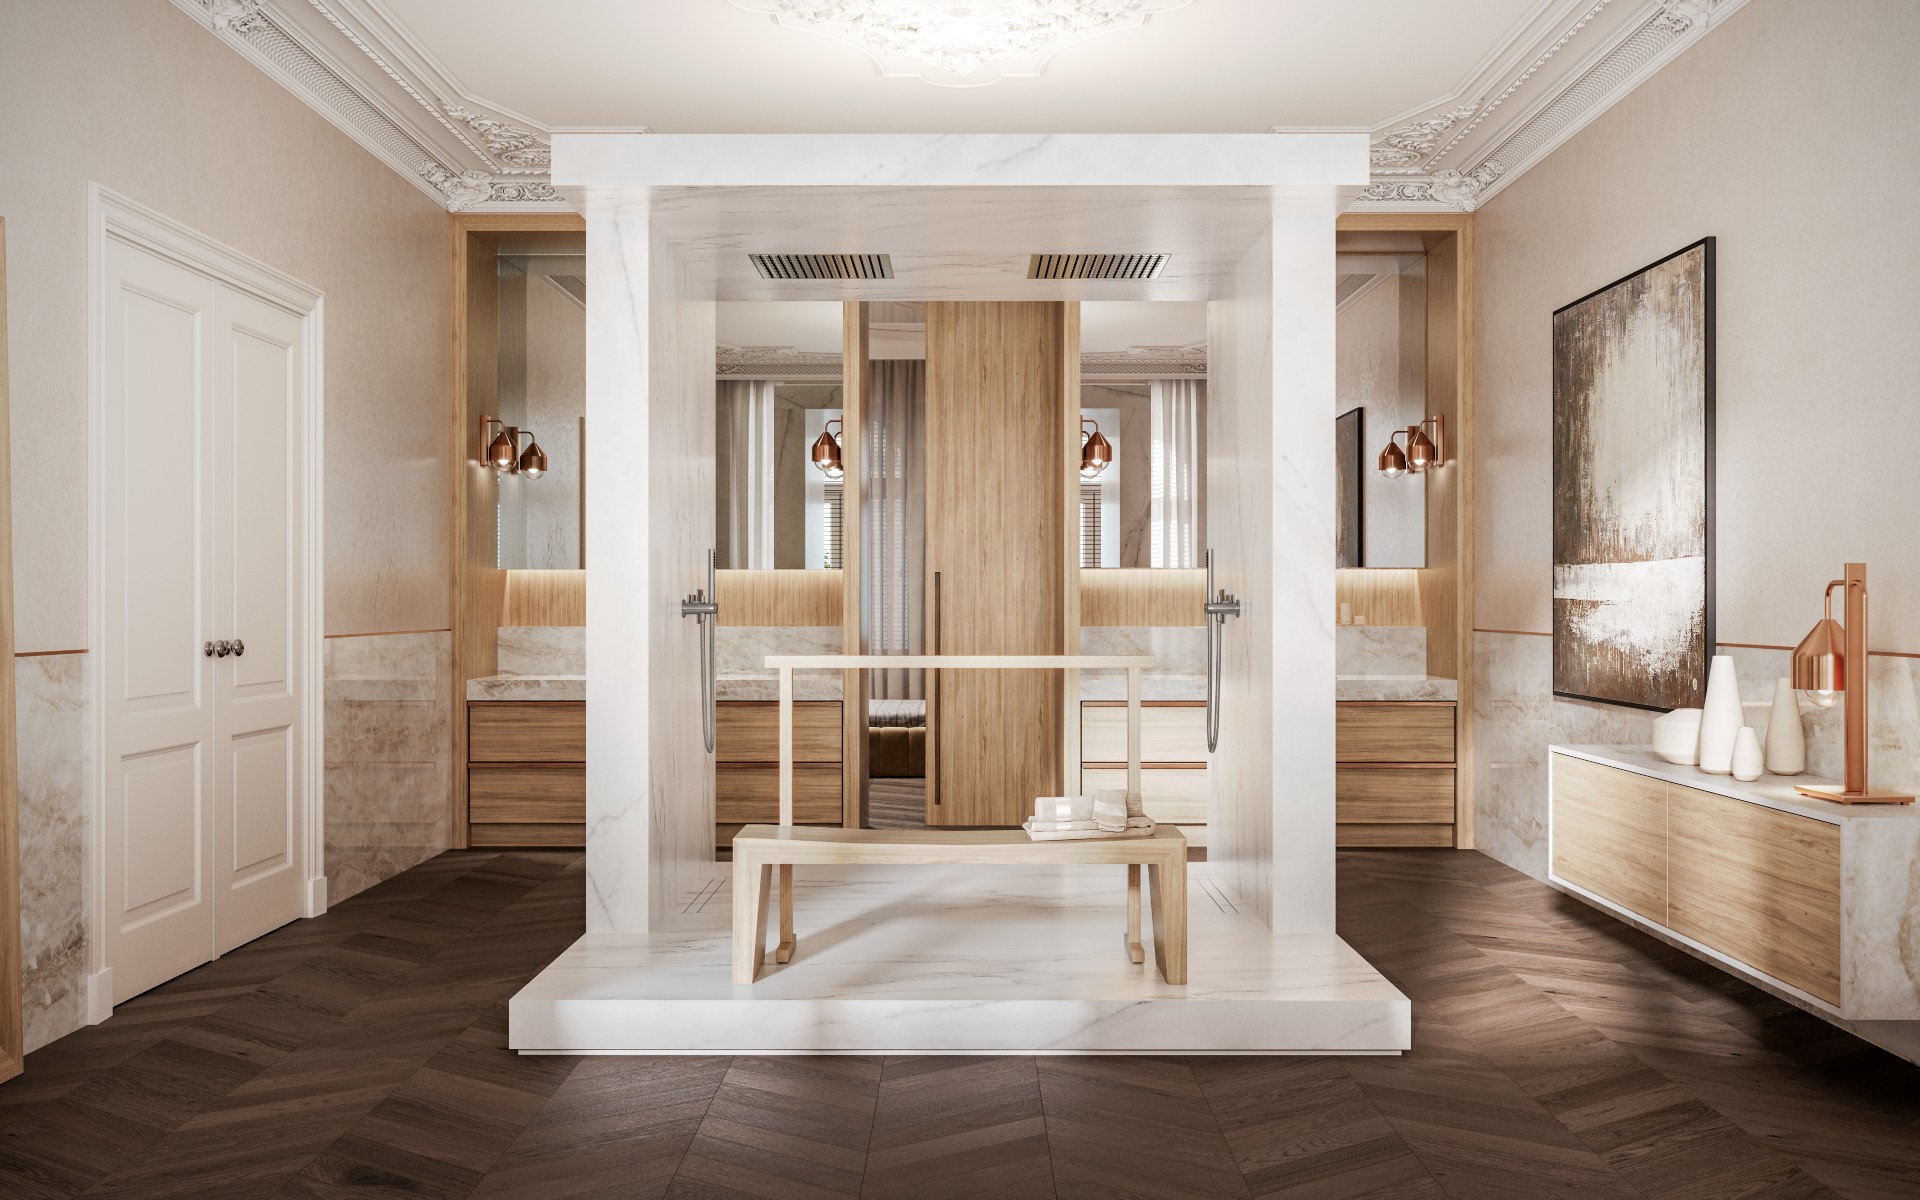 Image of THE PALAZZO IMÁGEN GENERAL in A bathroom for sharing and socialising - Cosentino